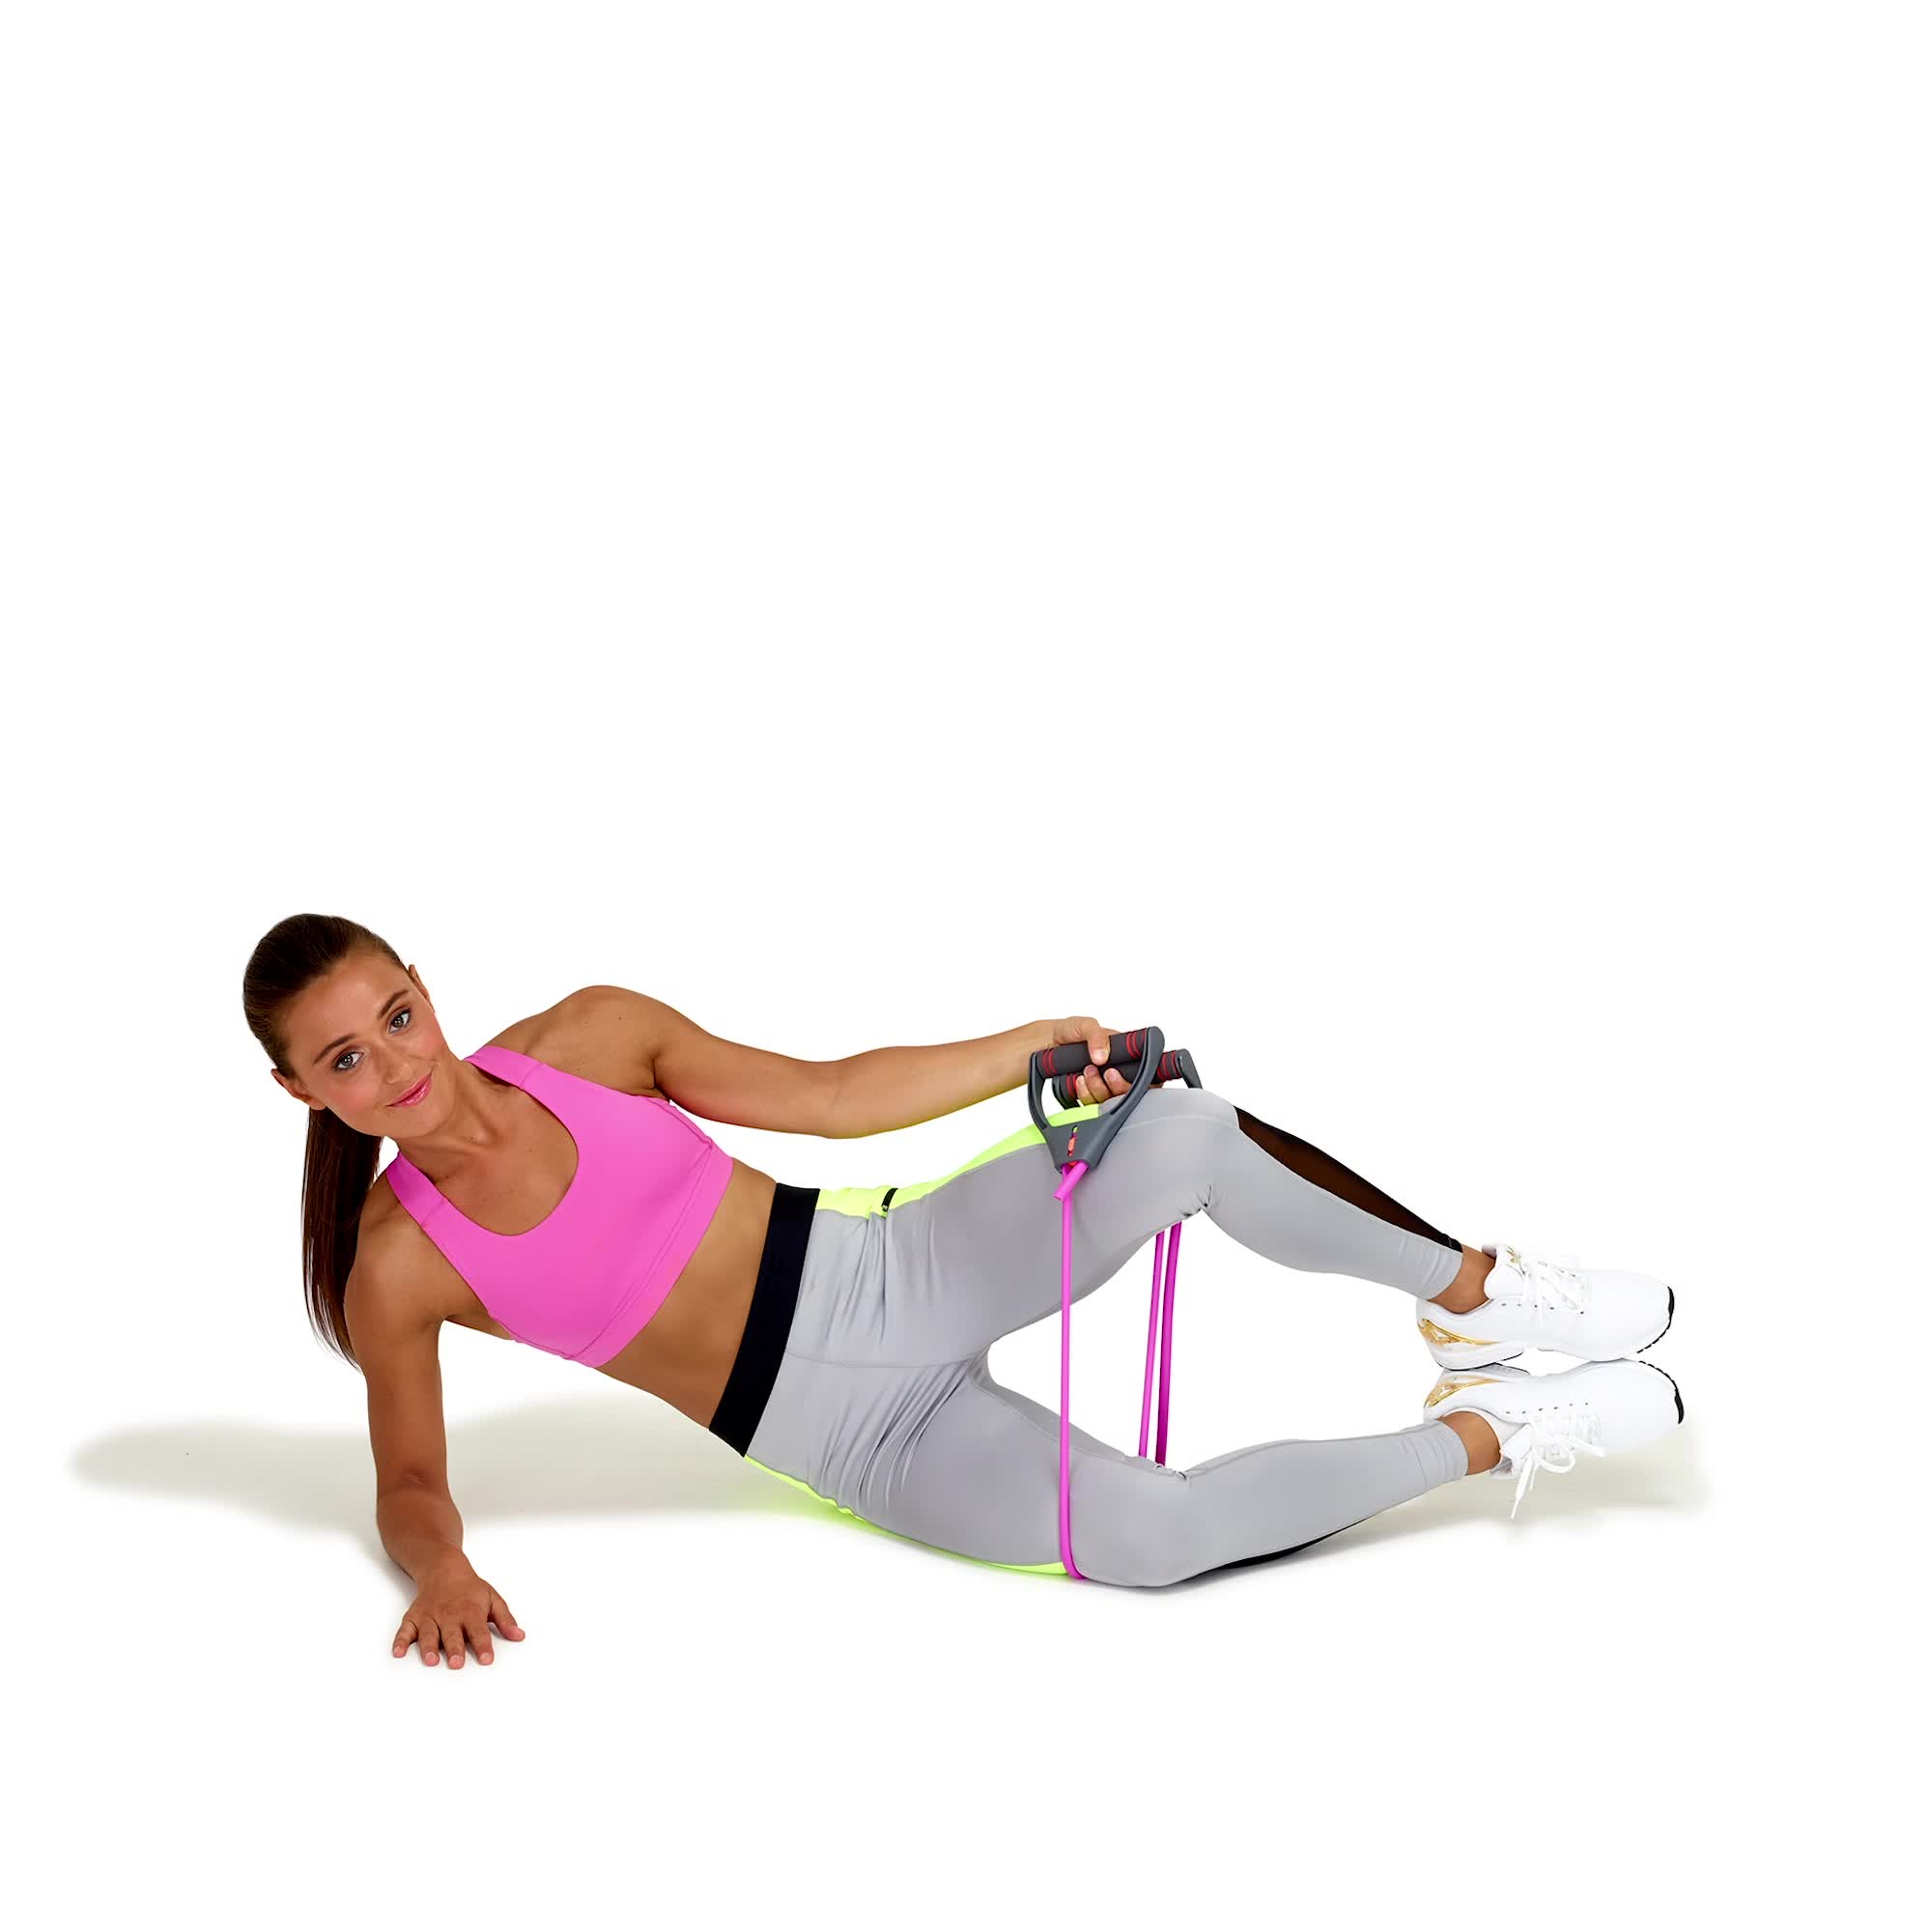 Resistance band workout for women over 40